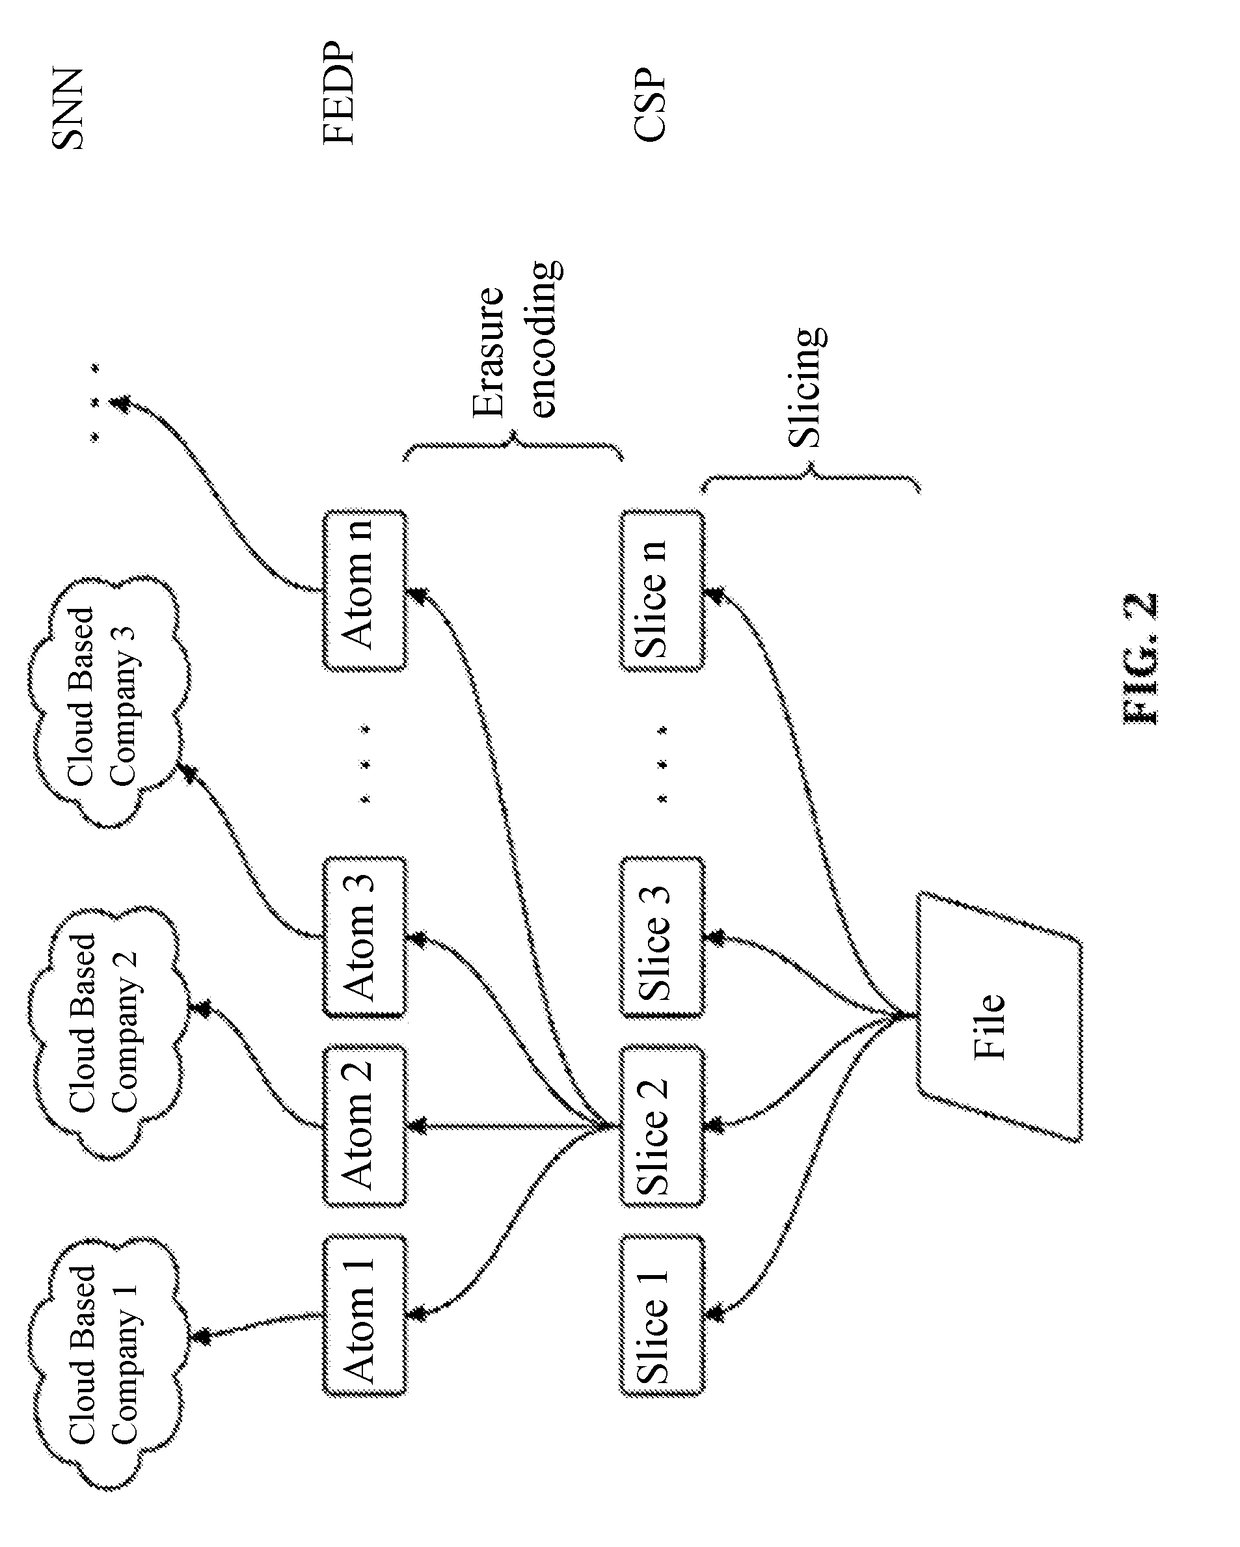 Distributed secure data storage and transmission of streaming media content